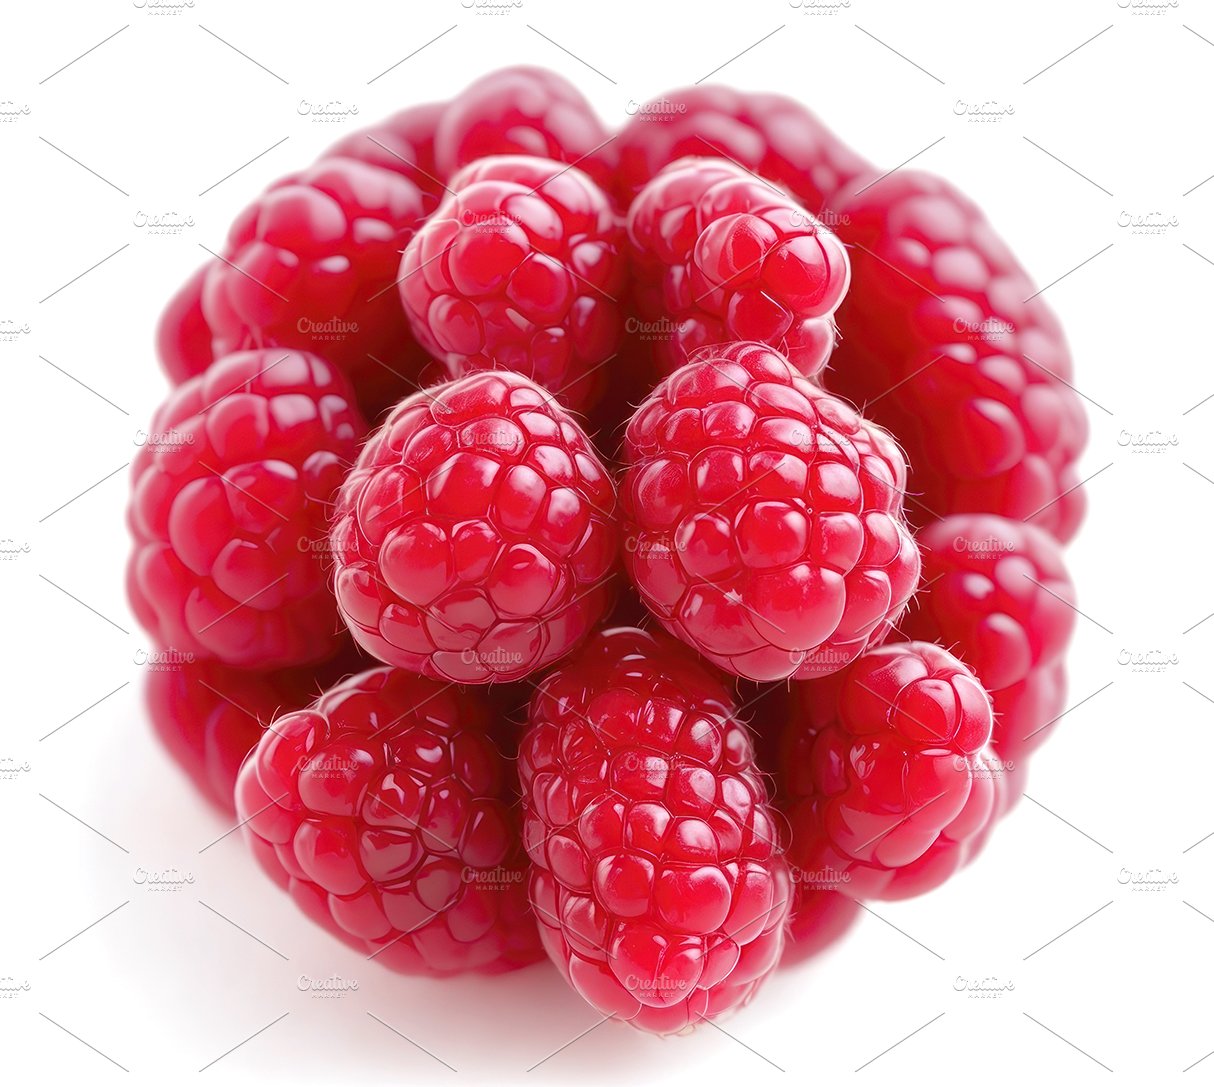 Raspberry on white background cover image.